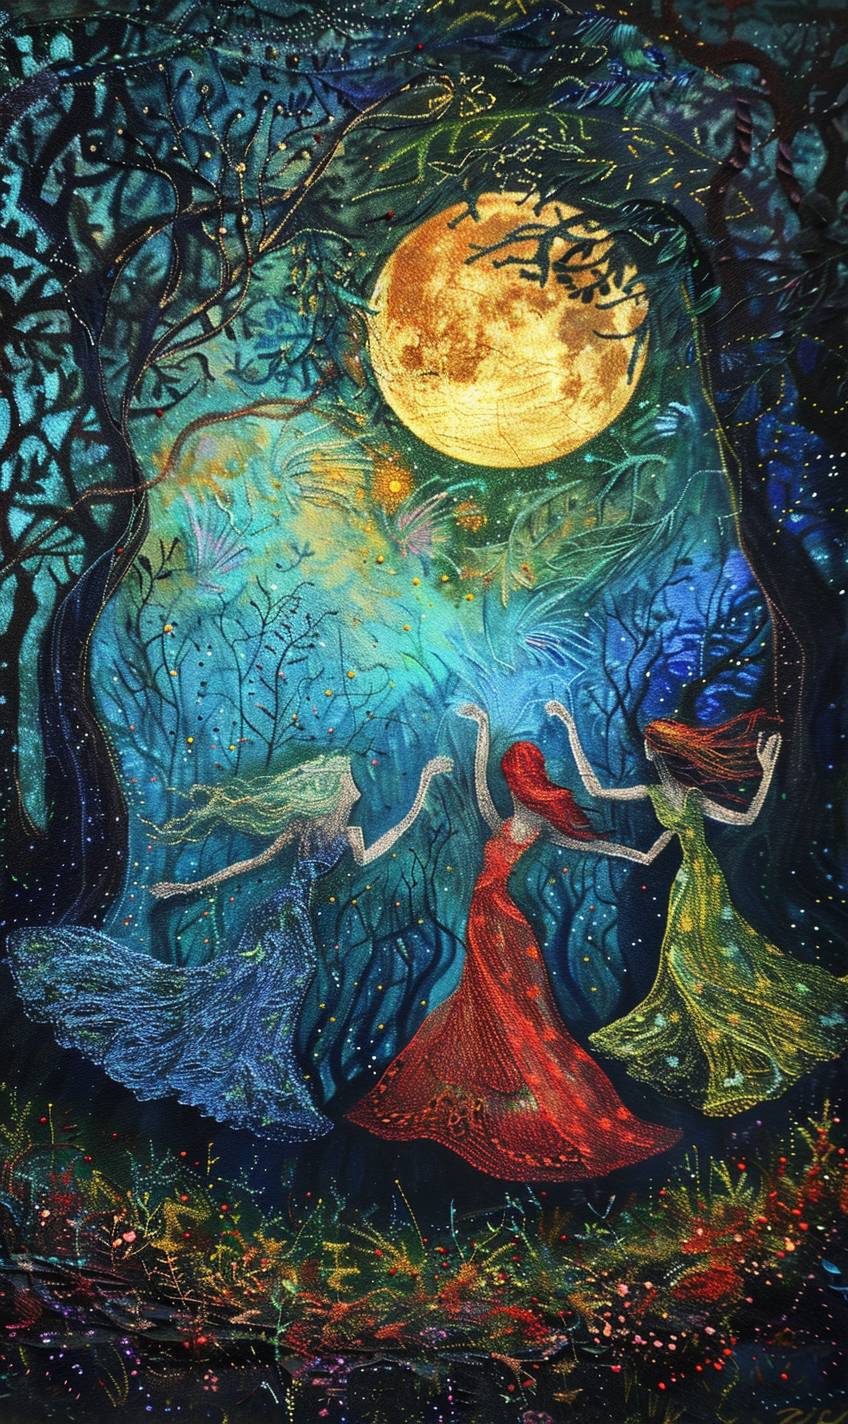 In style of Eric Carle, Ethereal beings dancing in a moonlit clearing